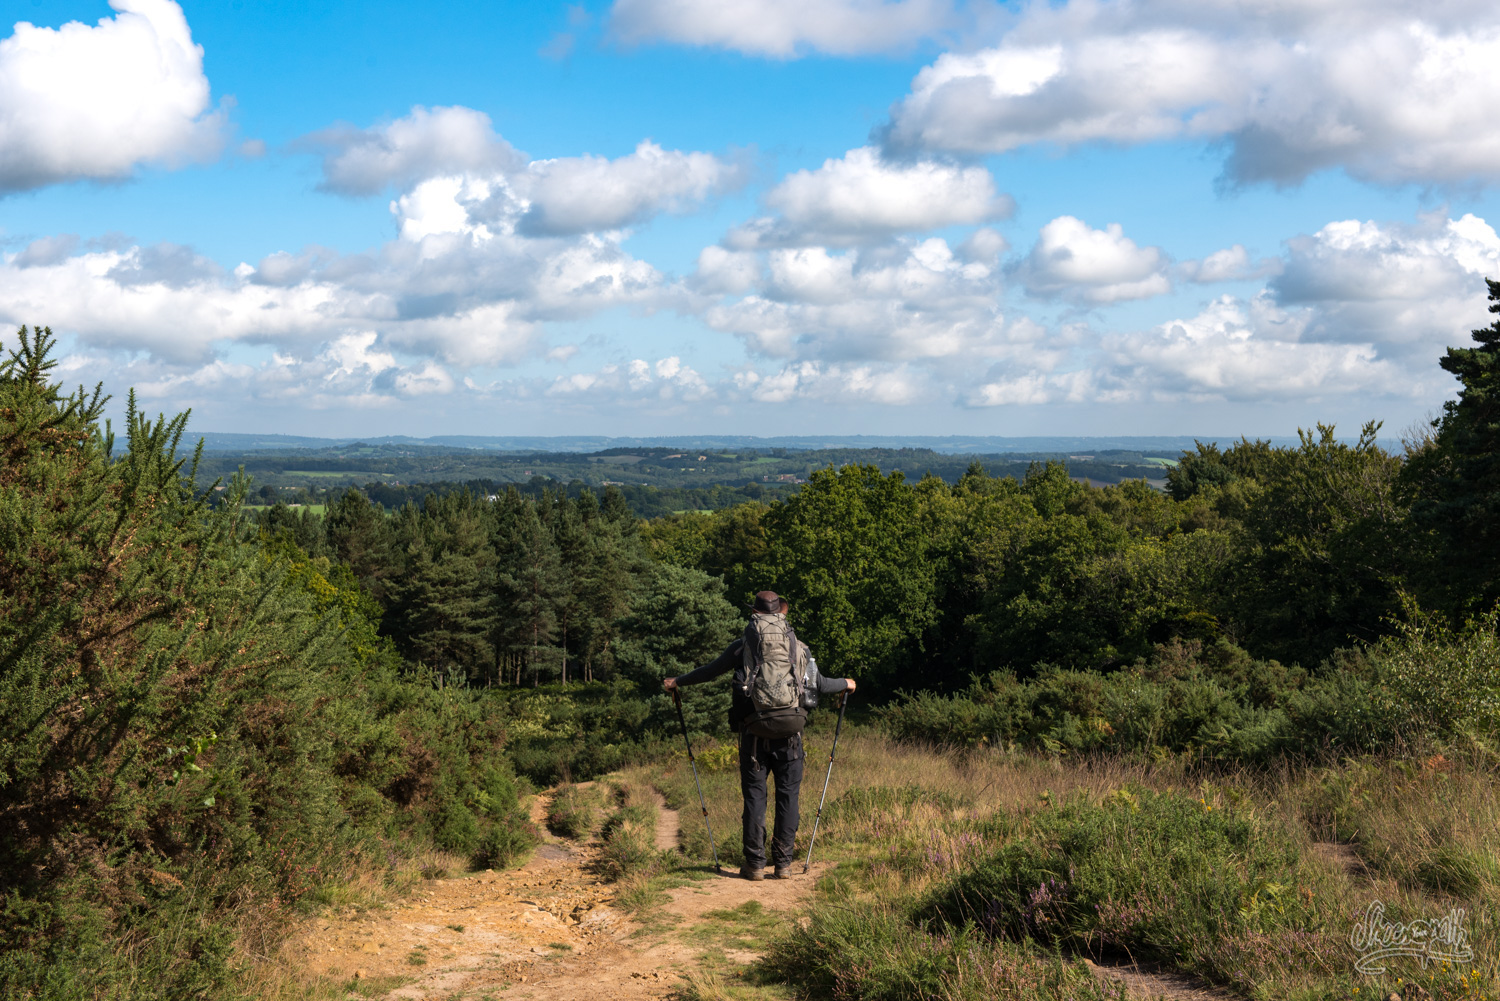 Looking over Ashdown Forest